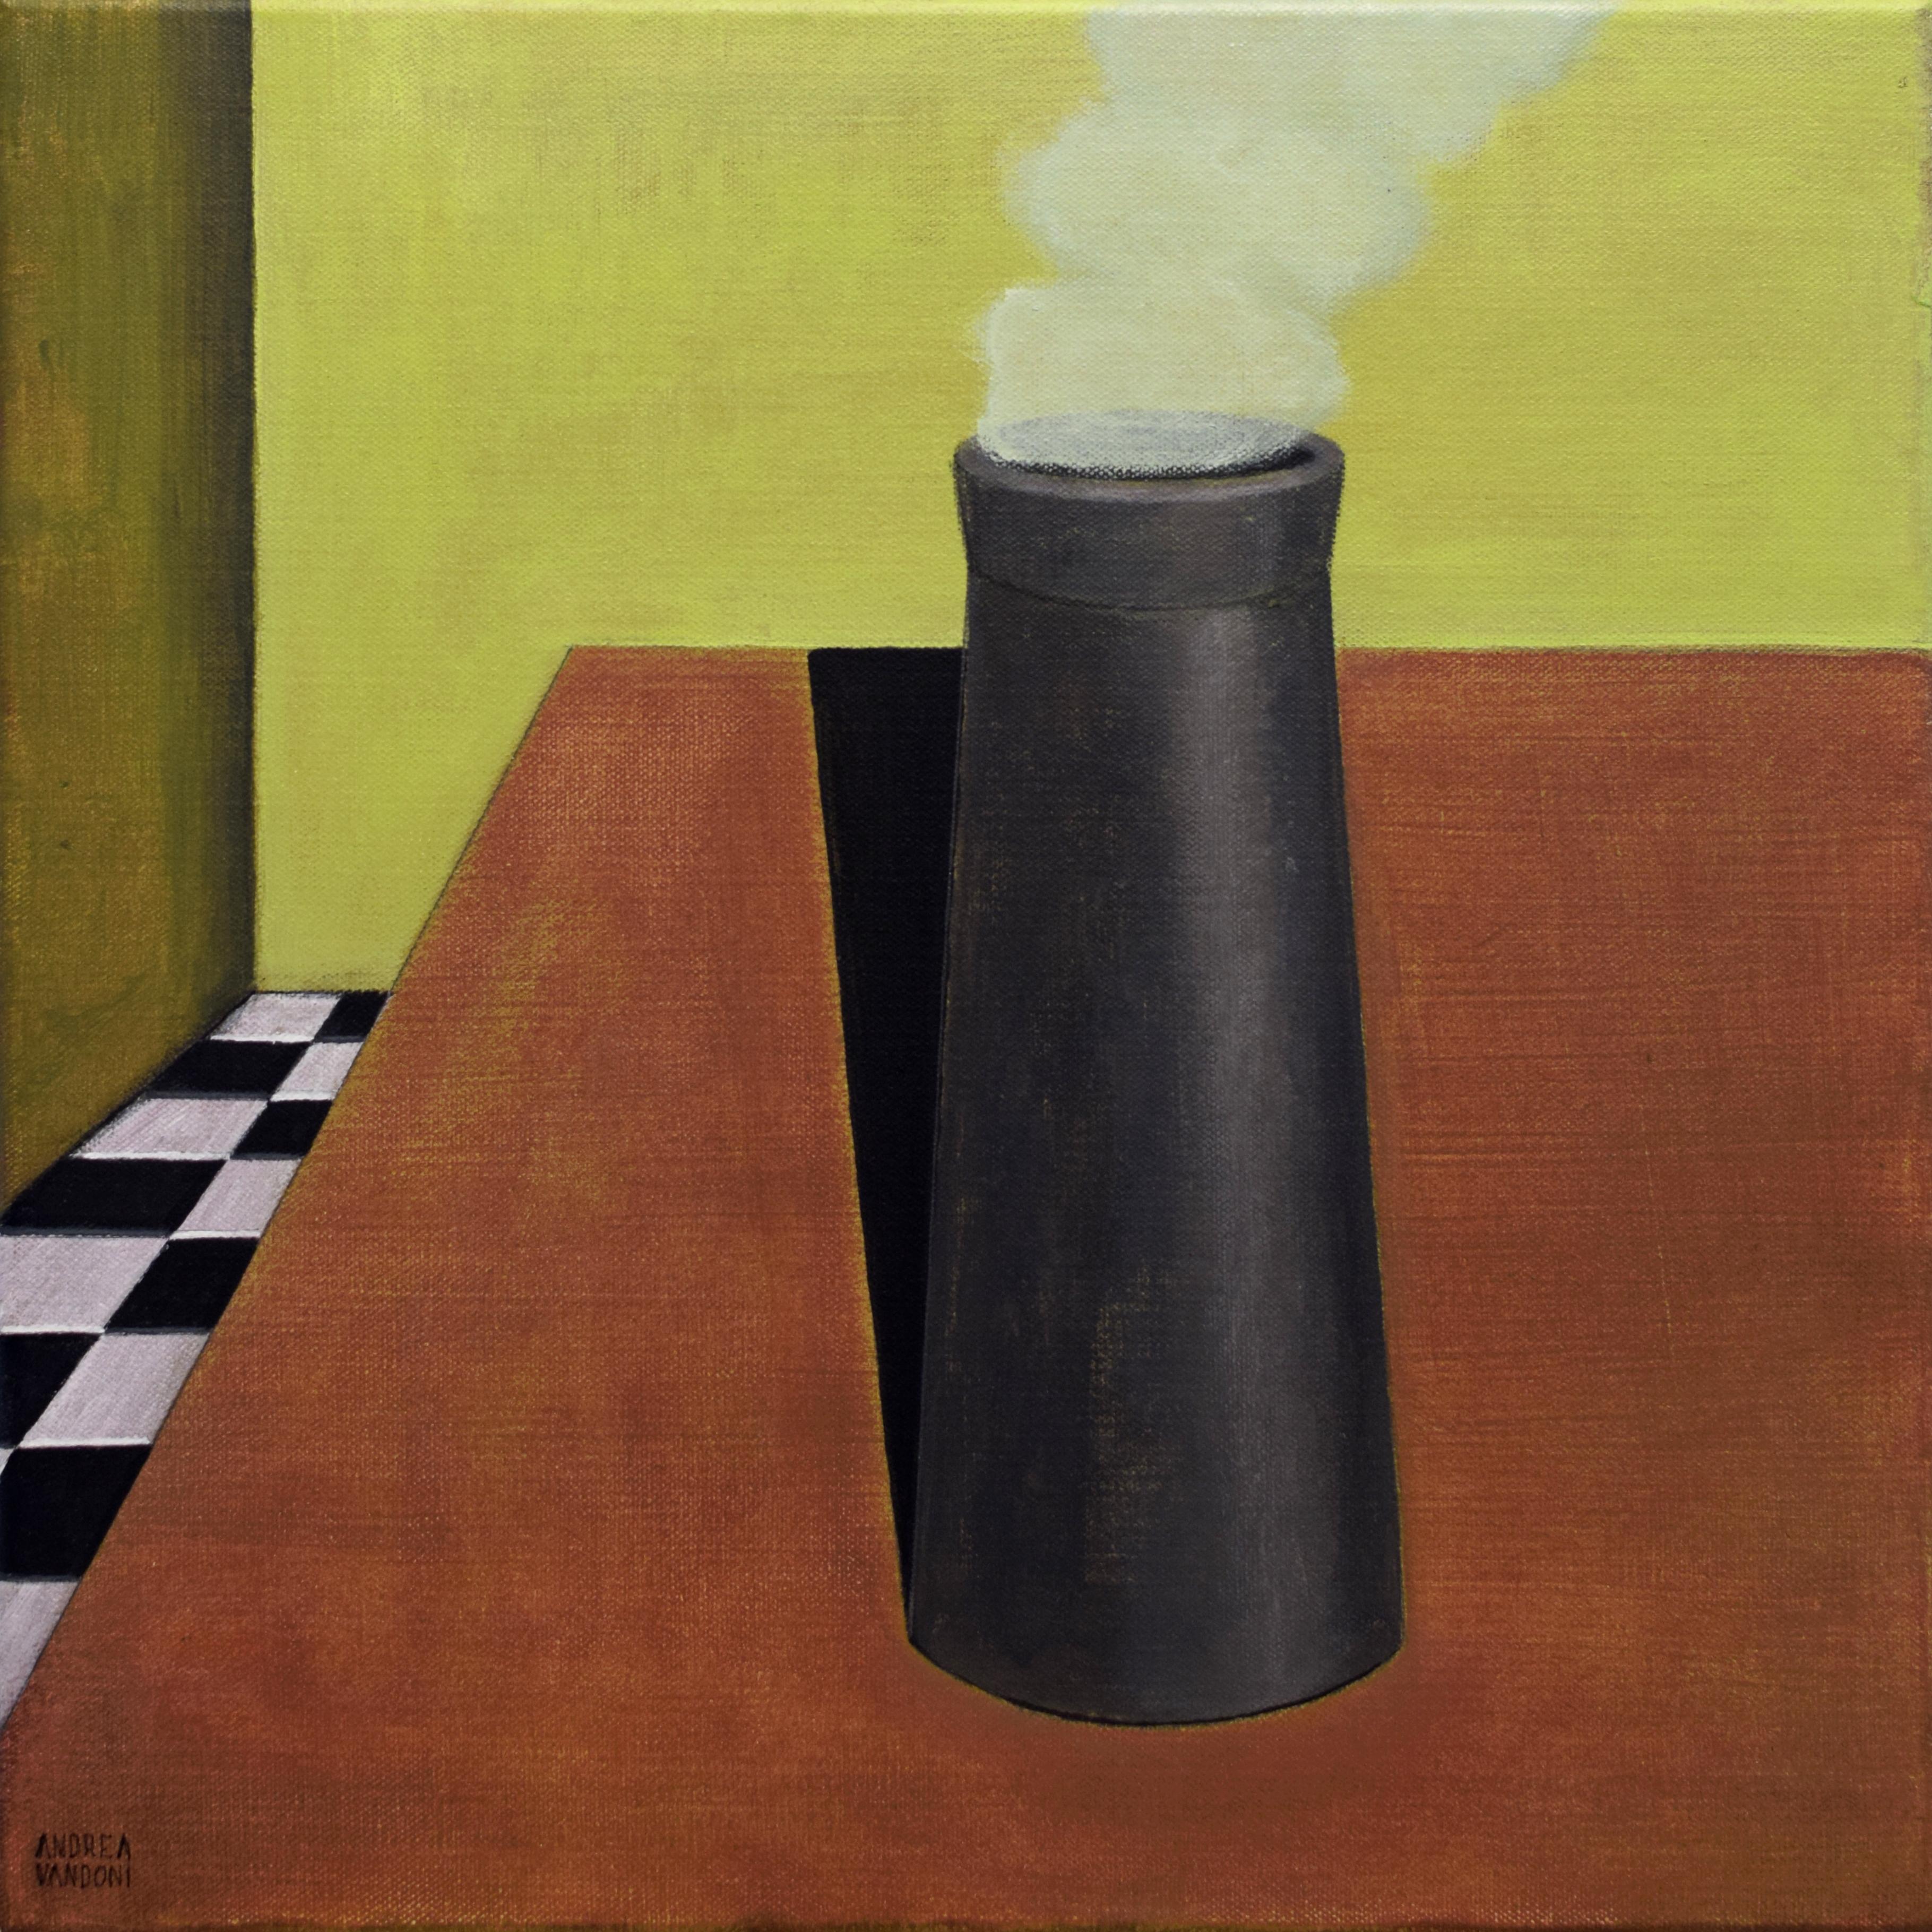 Italian Contemporary Art by Andrea Vandoni - The Chimney Is On The Table